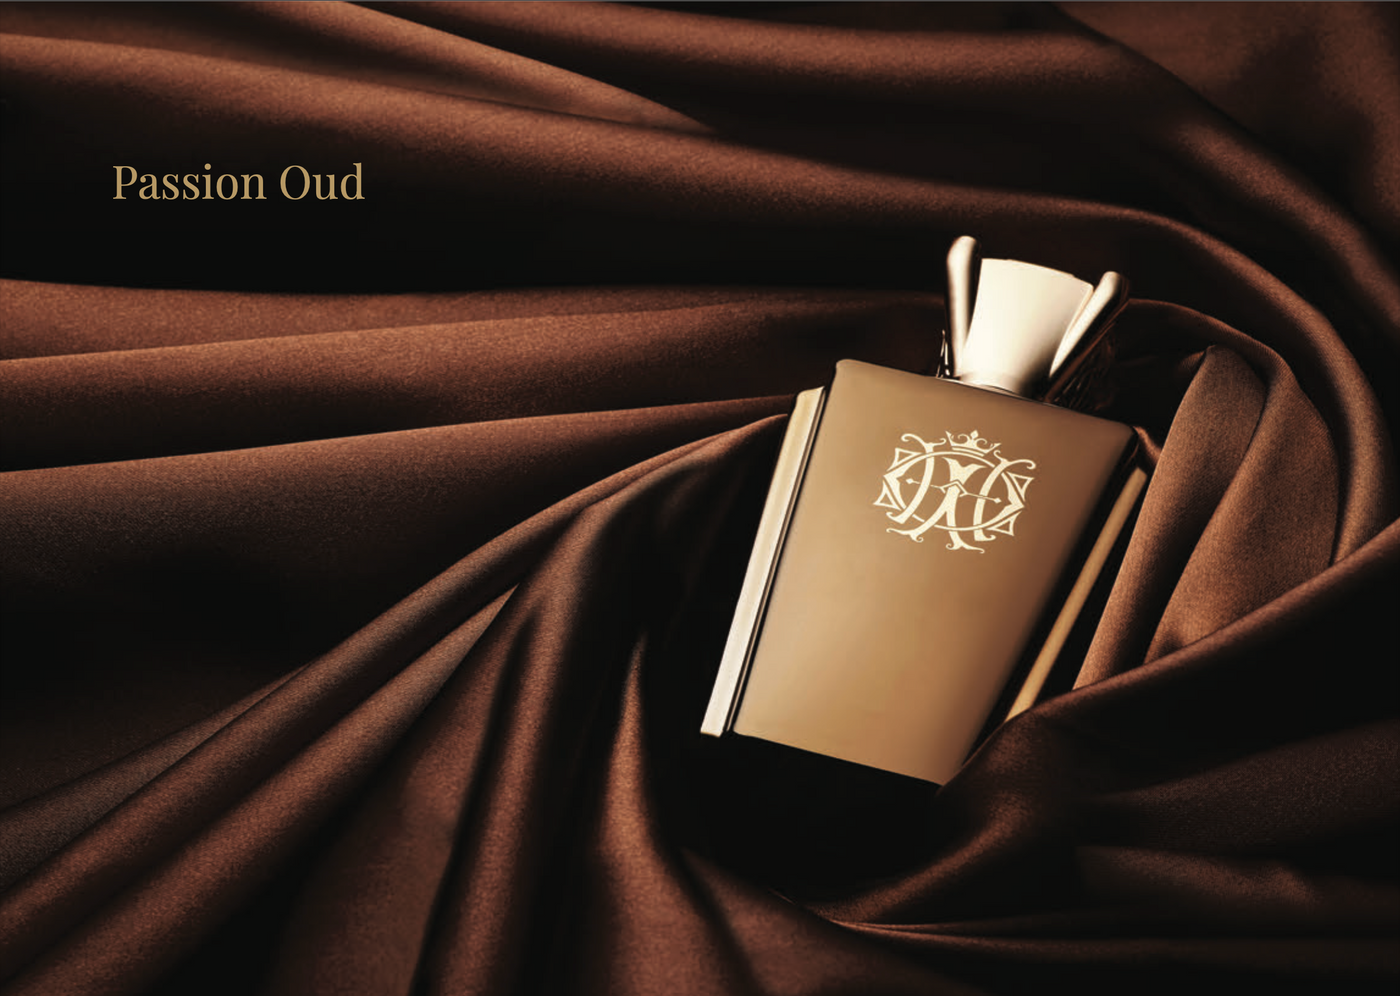 PASSION OUD